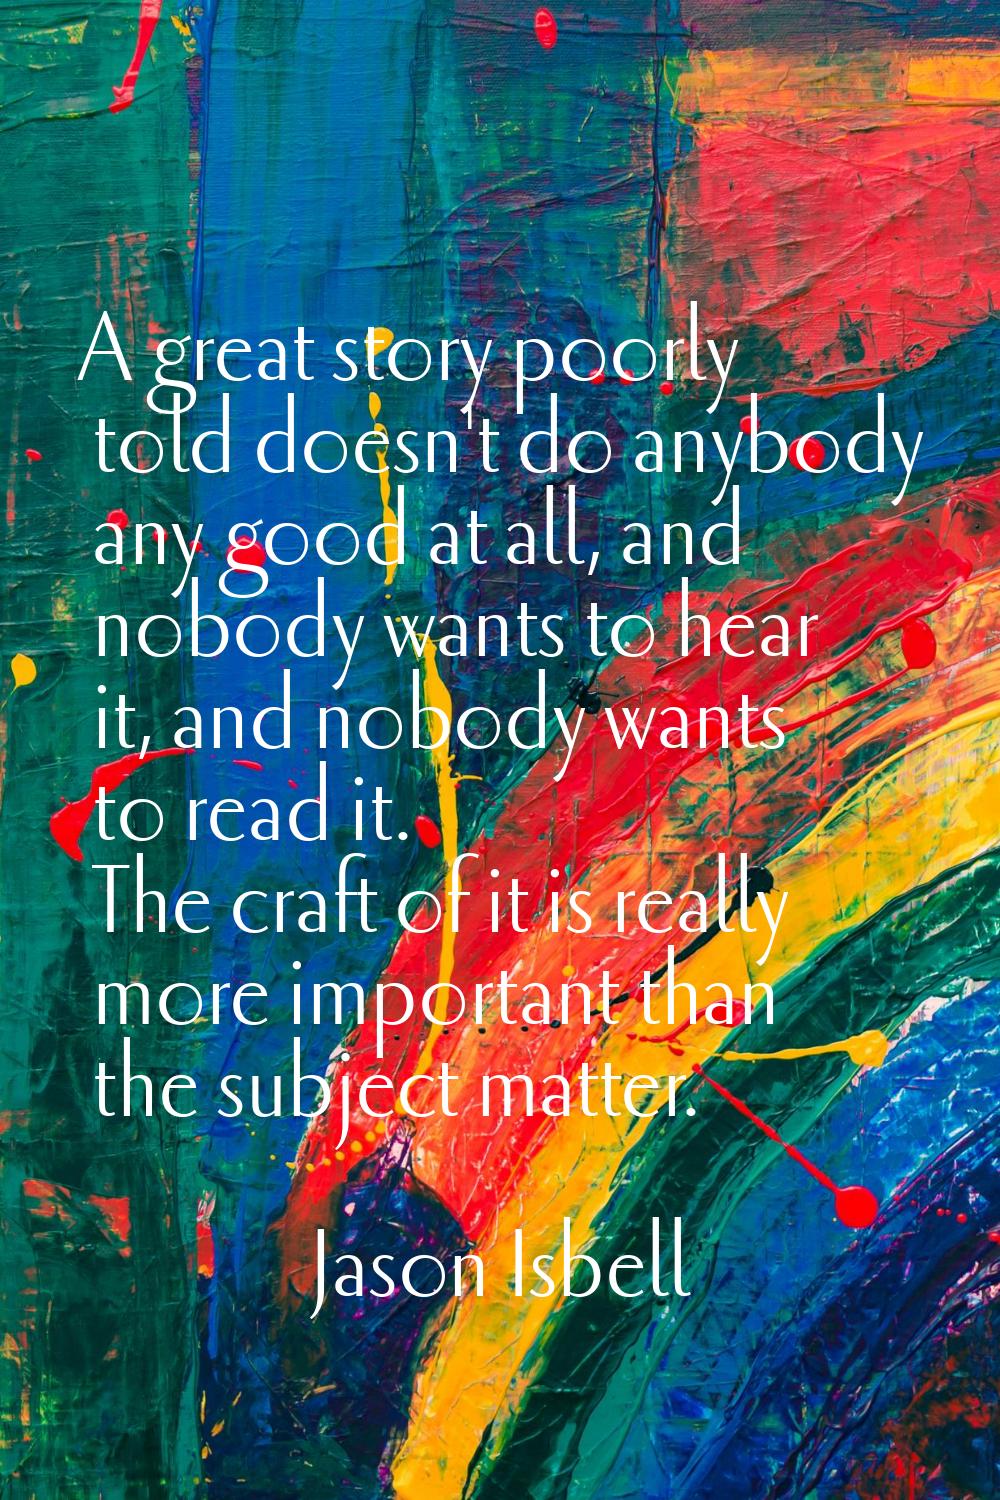 A great story poorly told doesn't do anybody any good at all, and nobody wants to hear it, and nobo